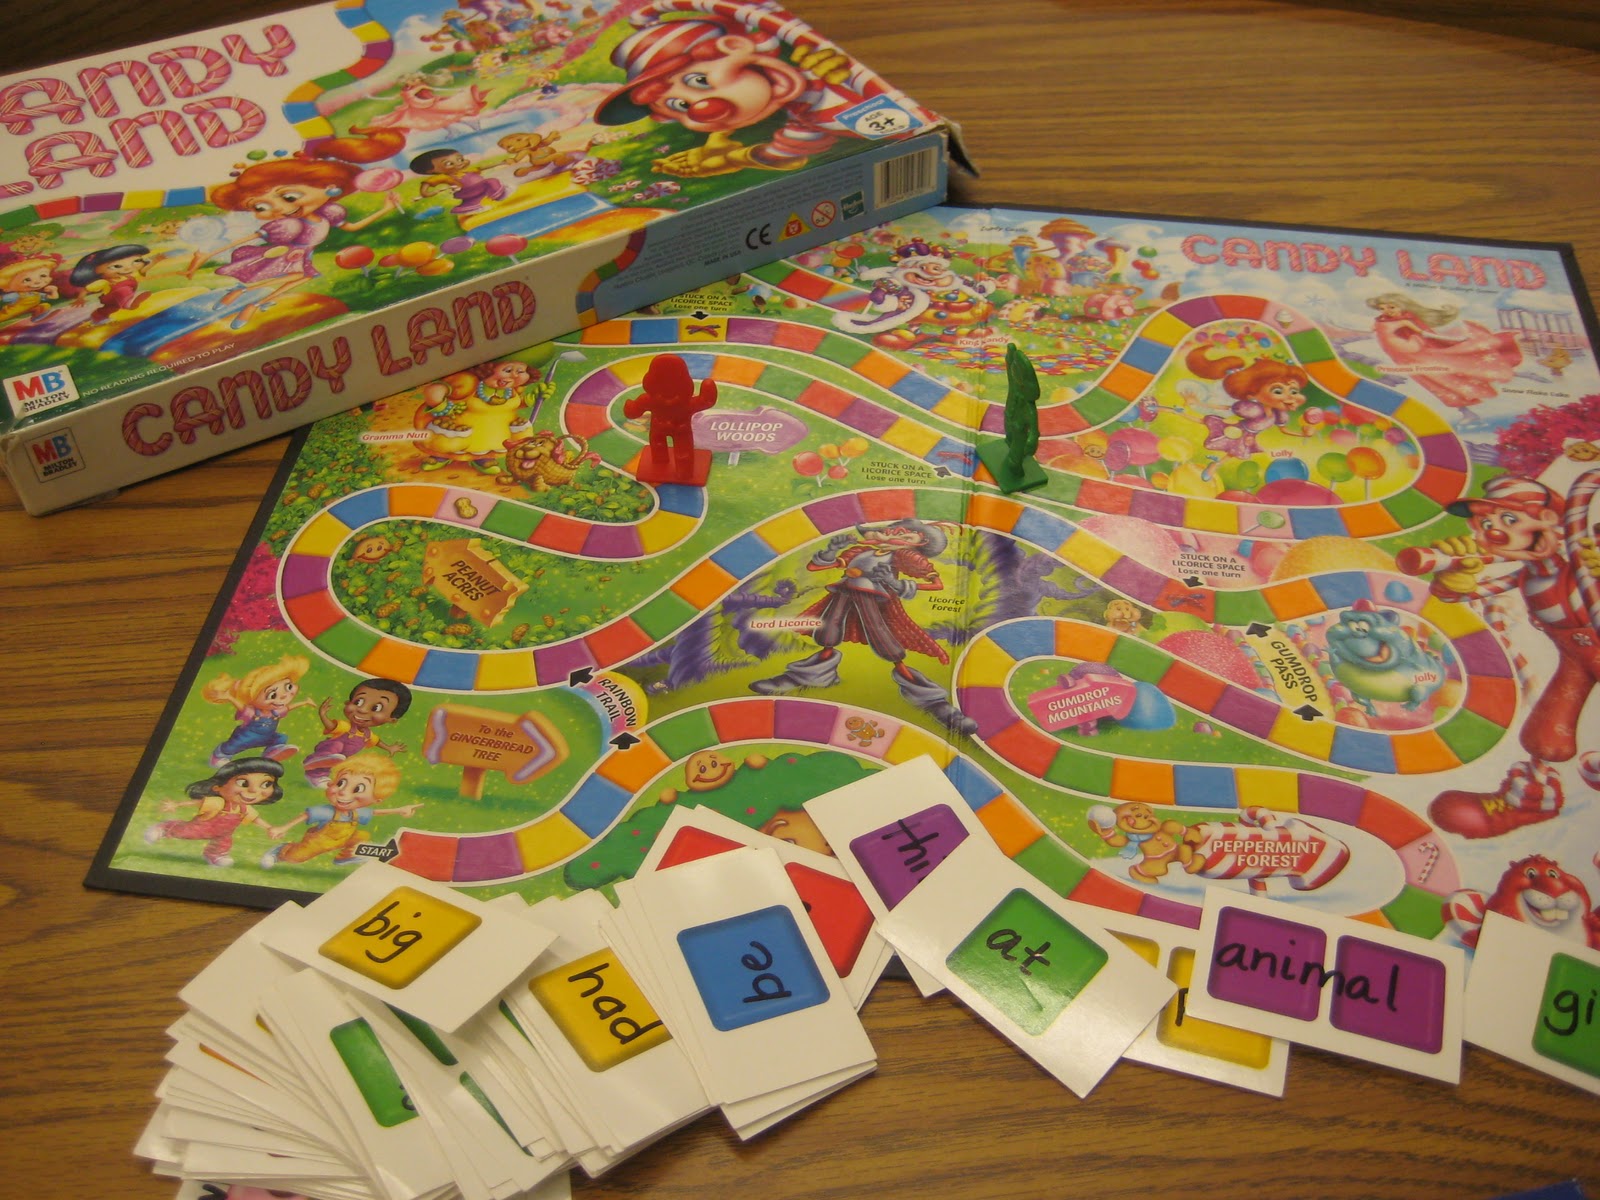 Candyland Board Game Template